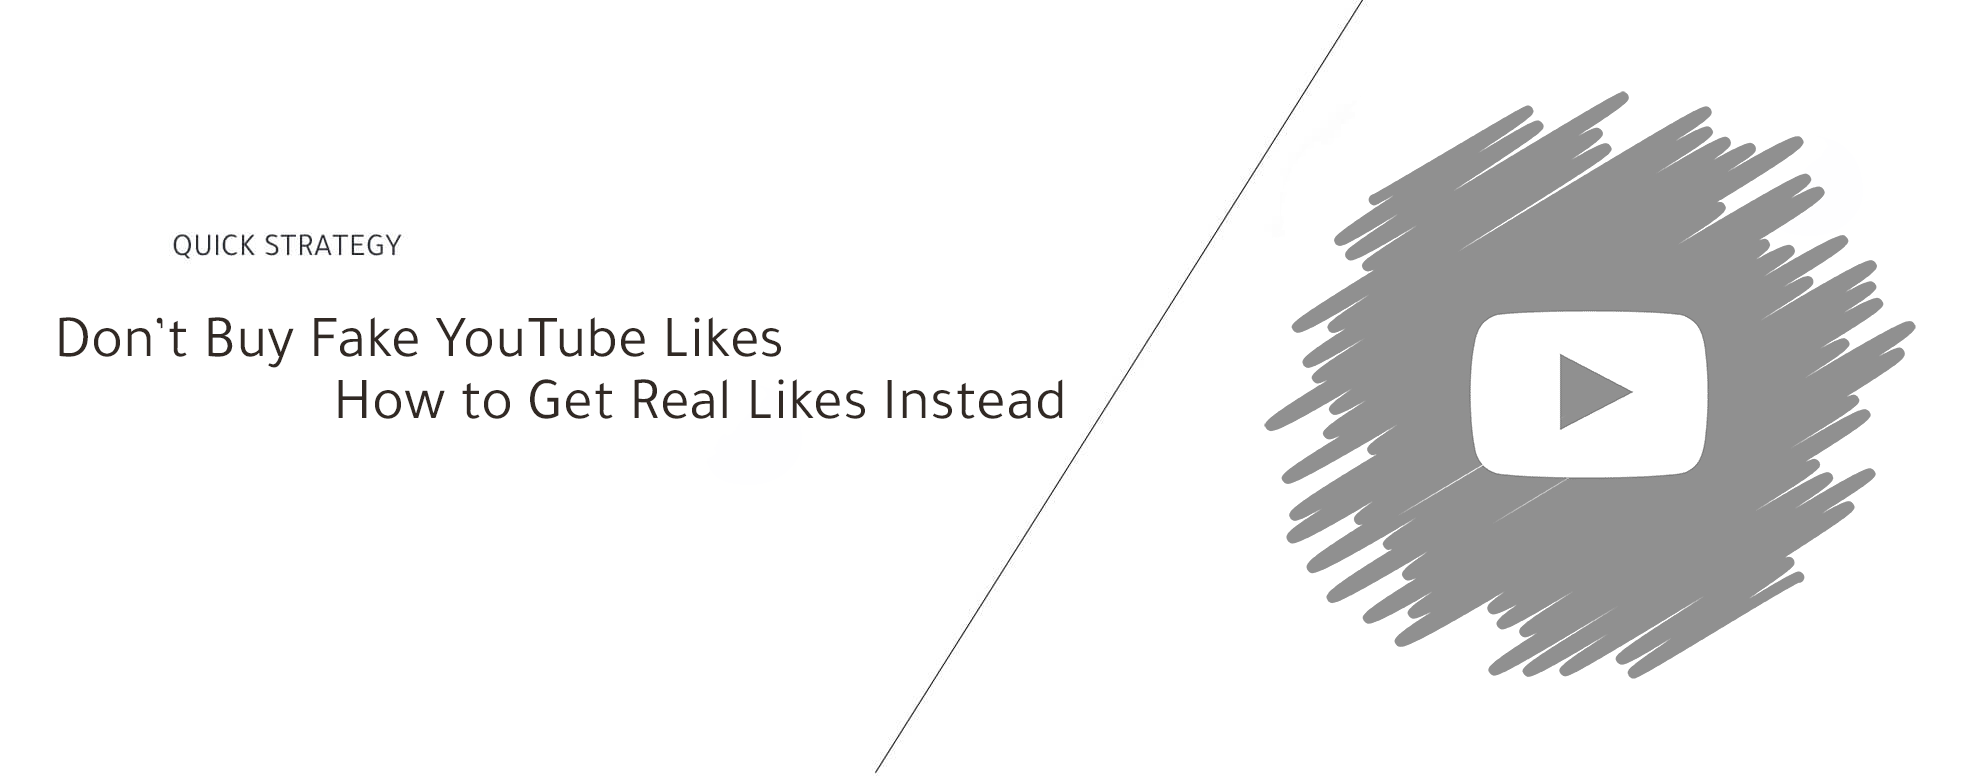 Don’t Buy Fake YouTube Likes — How to Get Real Likes Instead